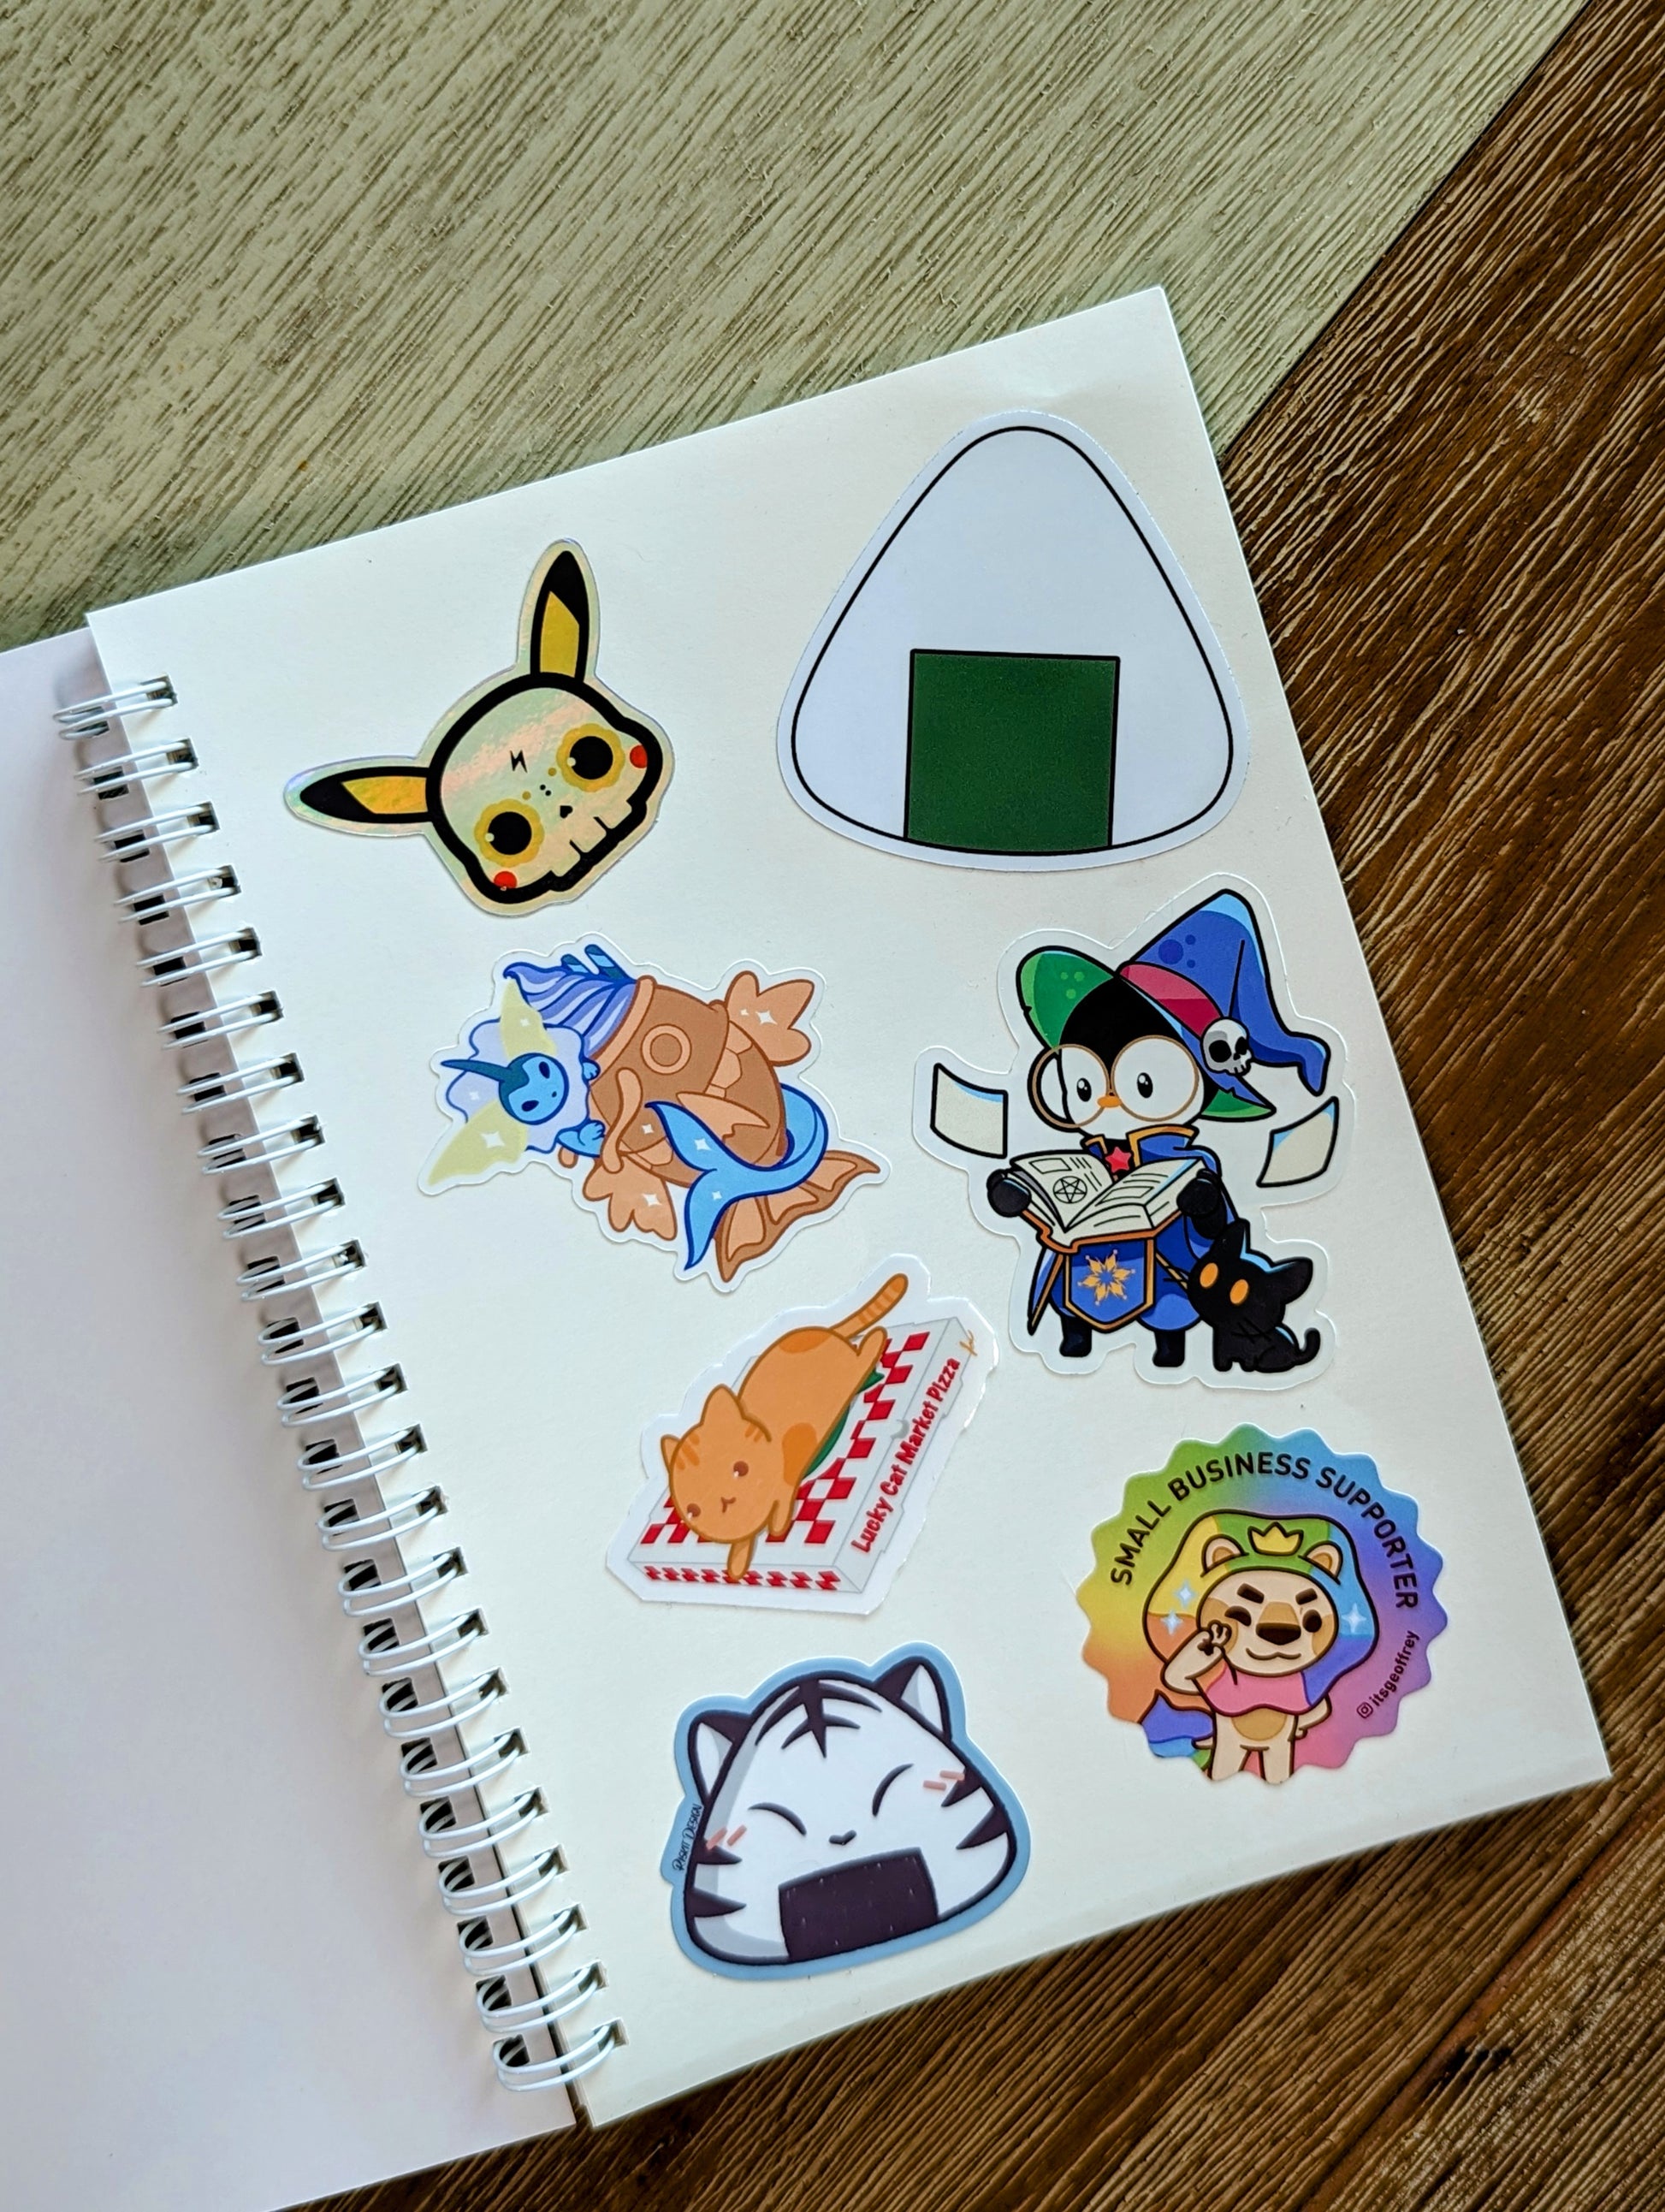 Note book Stickers - Free business Stickers